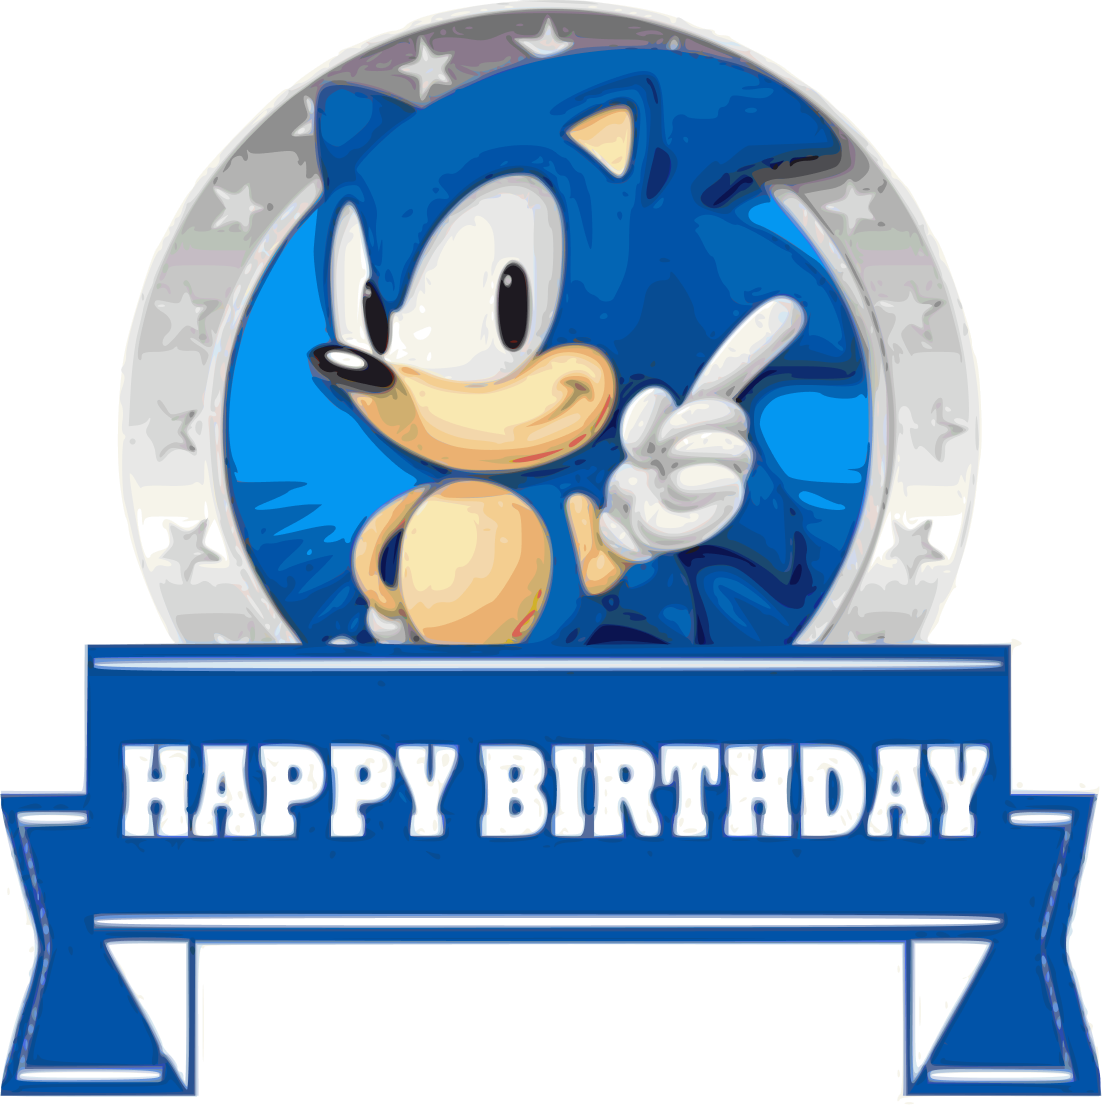 A wonderful image of a sonic with the inscription "Happy Birthday".